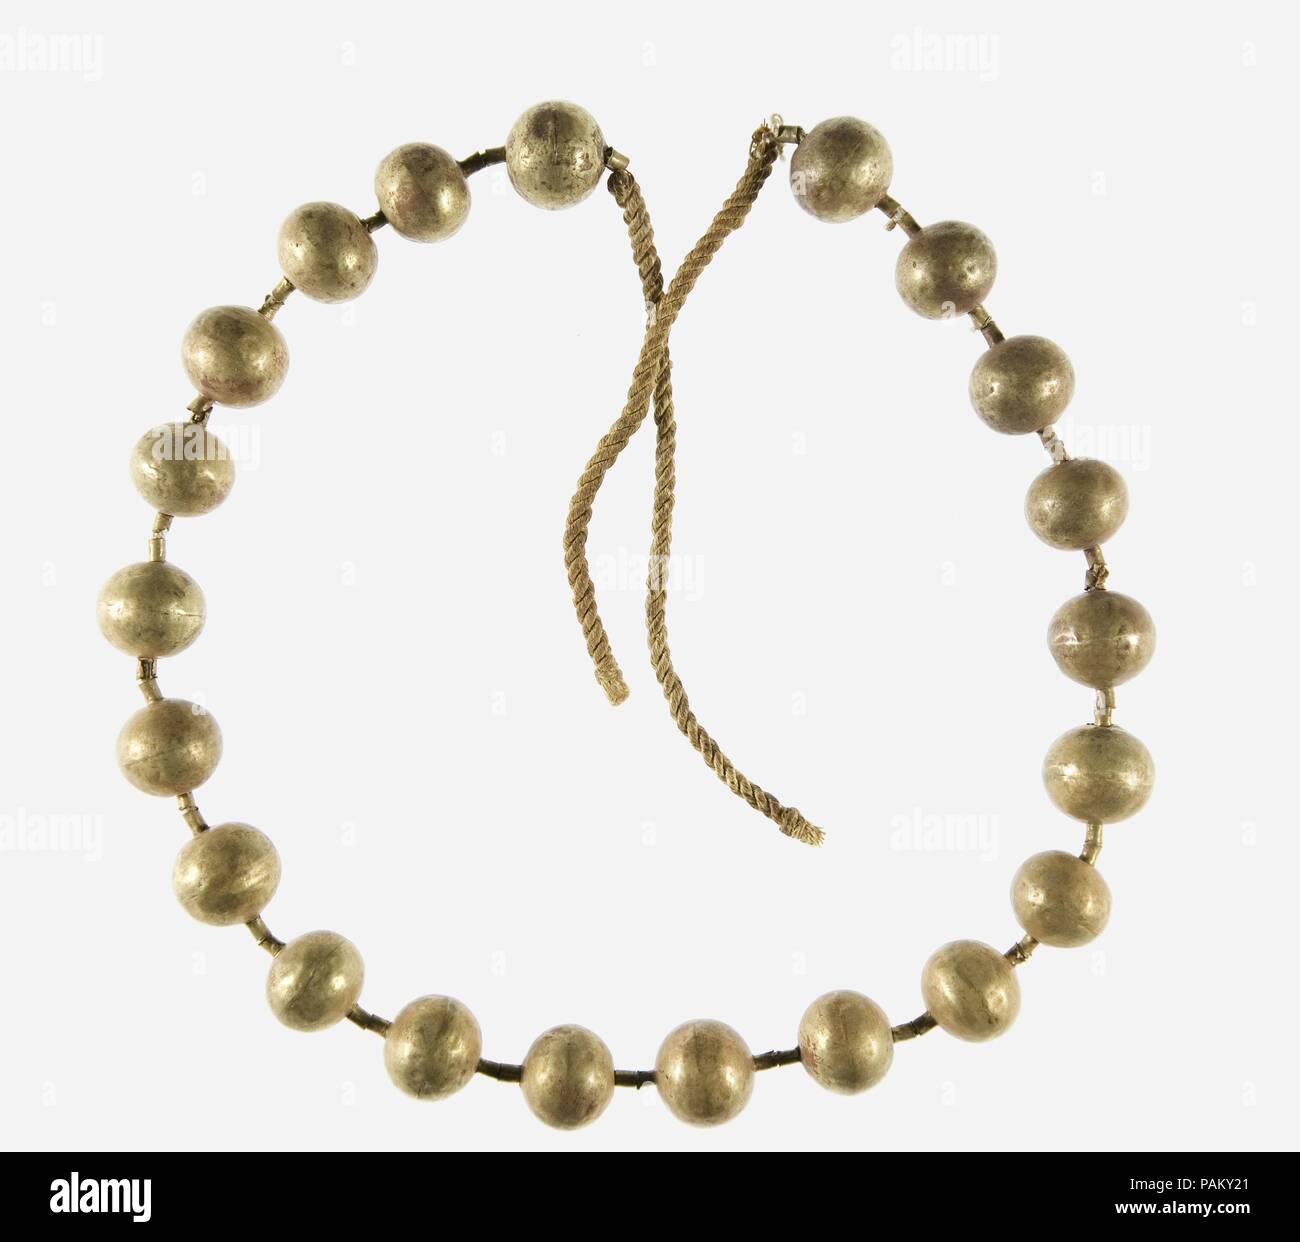 Gold Necklace of the Child Myt. Dimensions: L. 61 cm (24 in). Dynasty: Dynasty 11. Reign: reign of Mentuhotep II, early. Date: ca. 2051-2030 B.C..  Myt's mummy was wrapped in several layers of sheets, and five necklaces (22.3.320-.324) were found between the layers around her head. The precious material and fine quality of her jewelry indicate that she must have been of high status, even though she was just a little girl five years old. It has been speculated that she was a daughter of Mentuhotep II, but there is no direct evidence for that. Museum: Metropolitan Museum of Art, New York, USA. Stock Photo